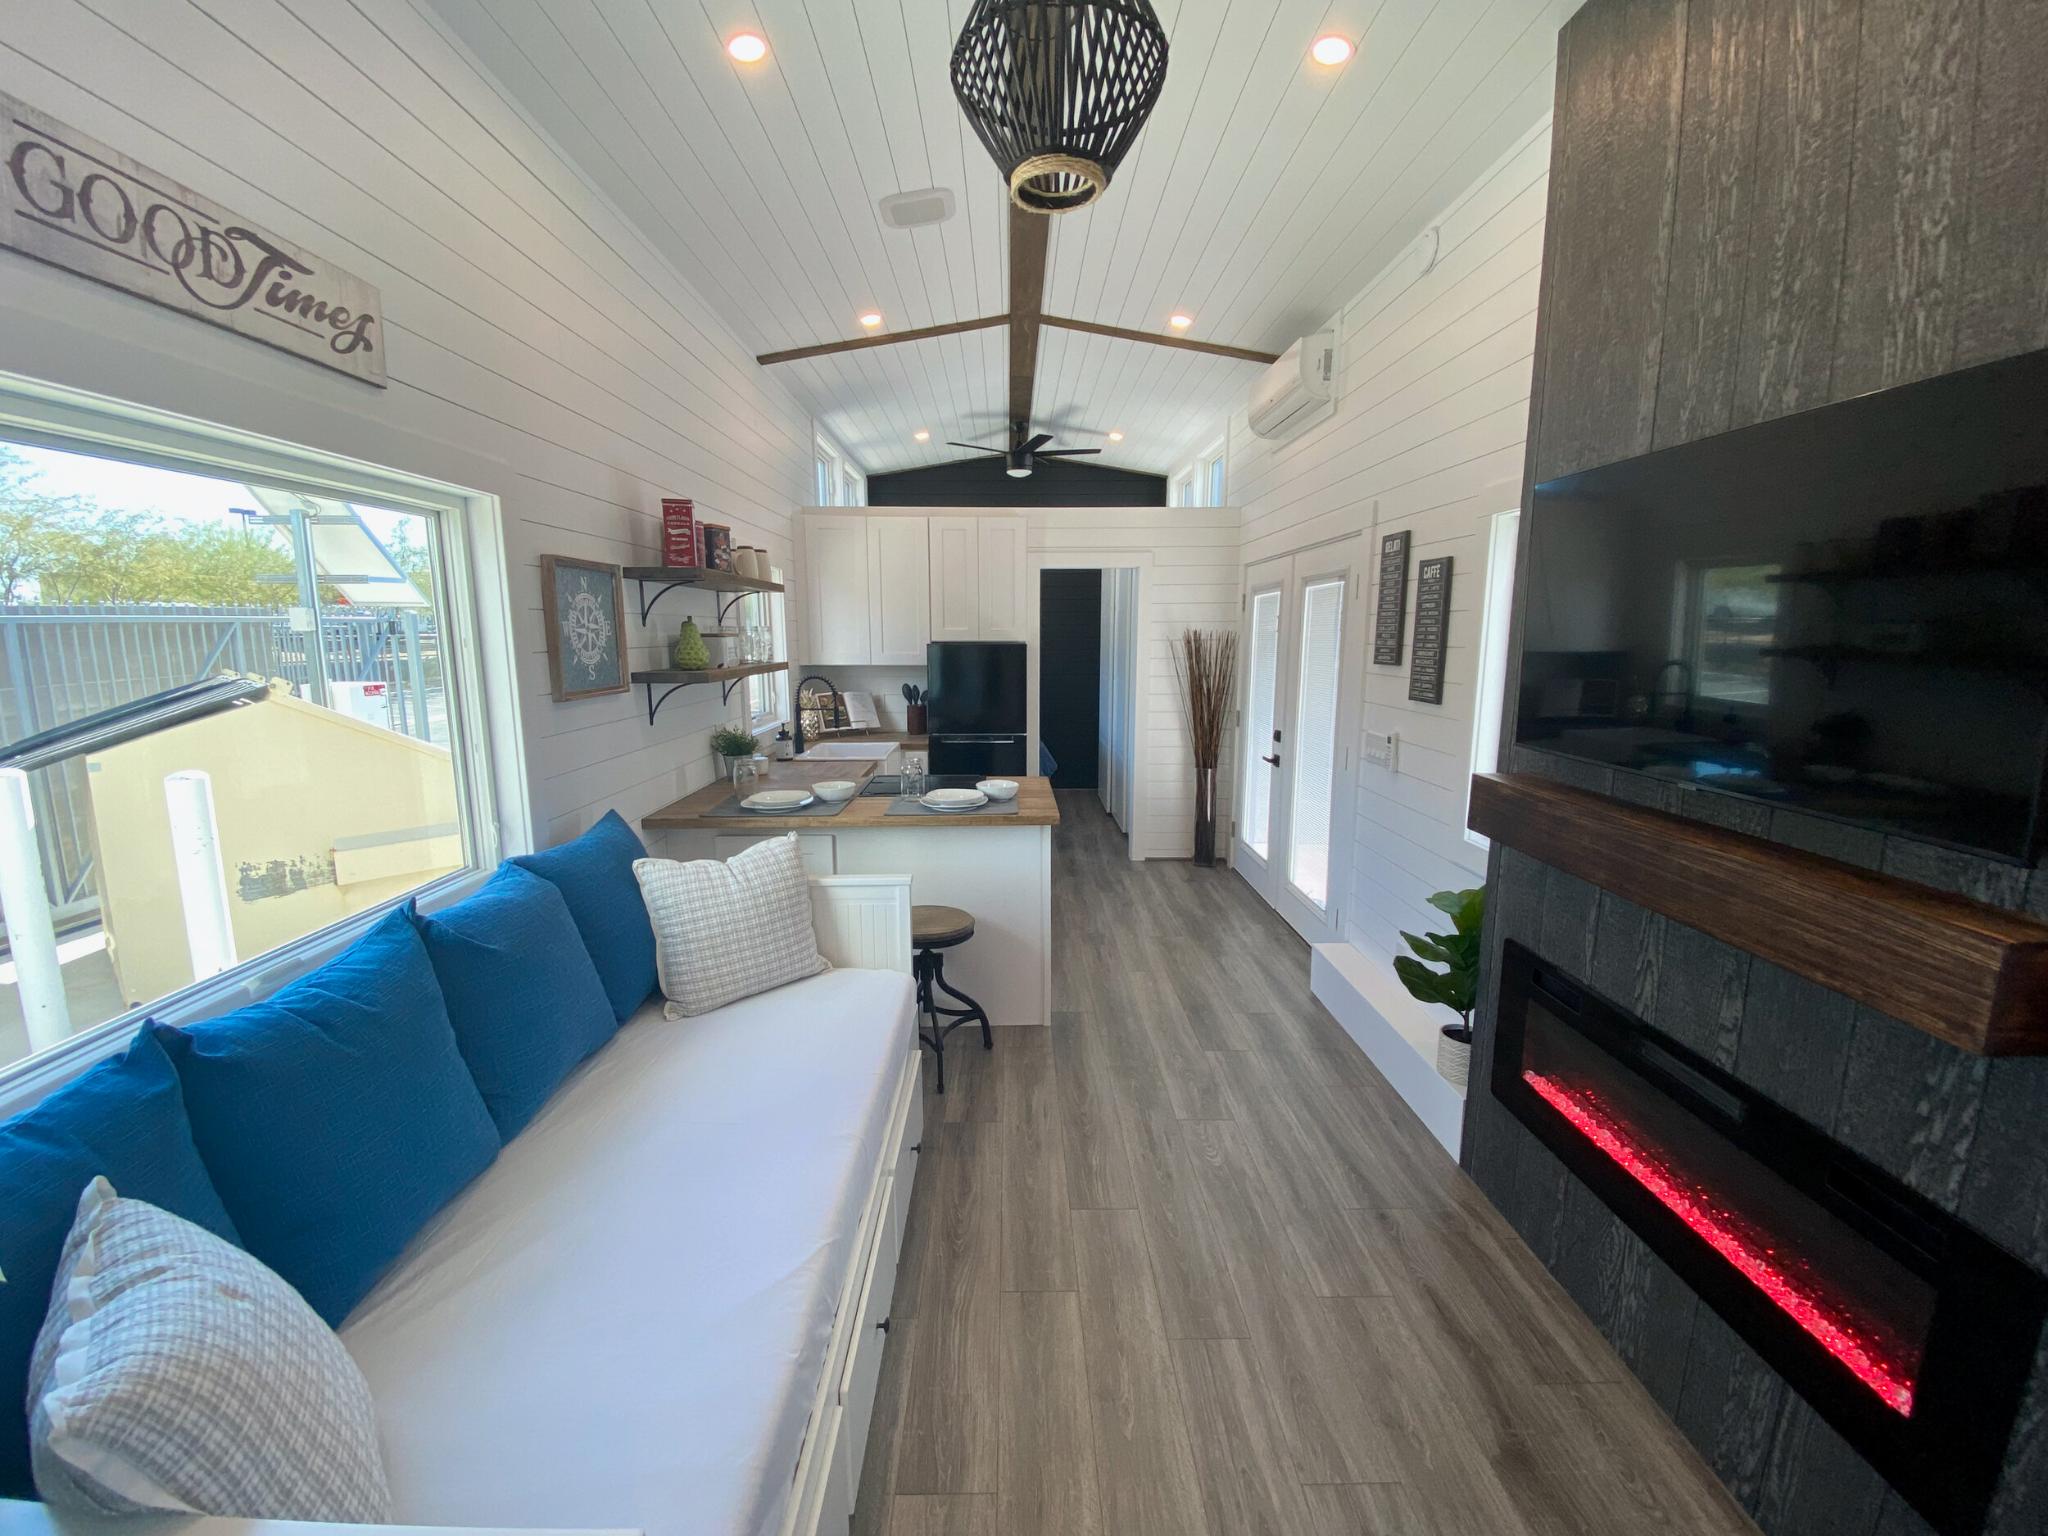 Jen’s Château by Uncharted Tiny Homes